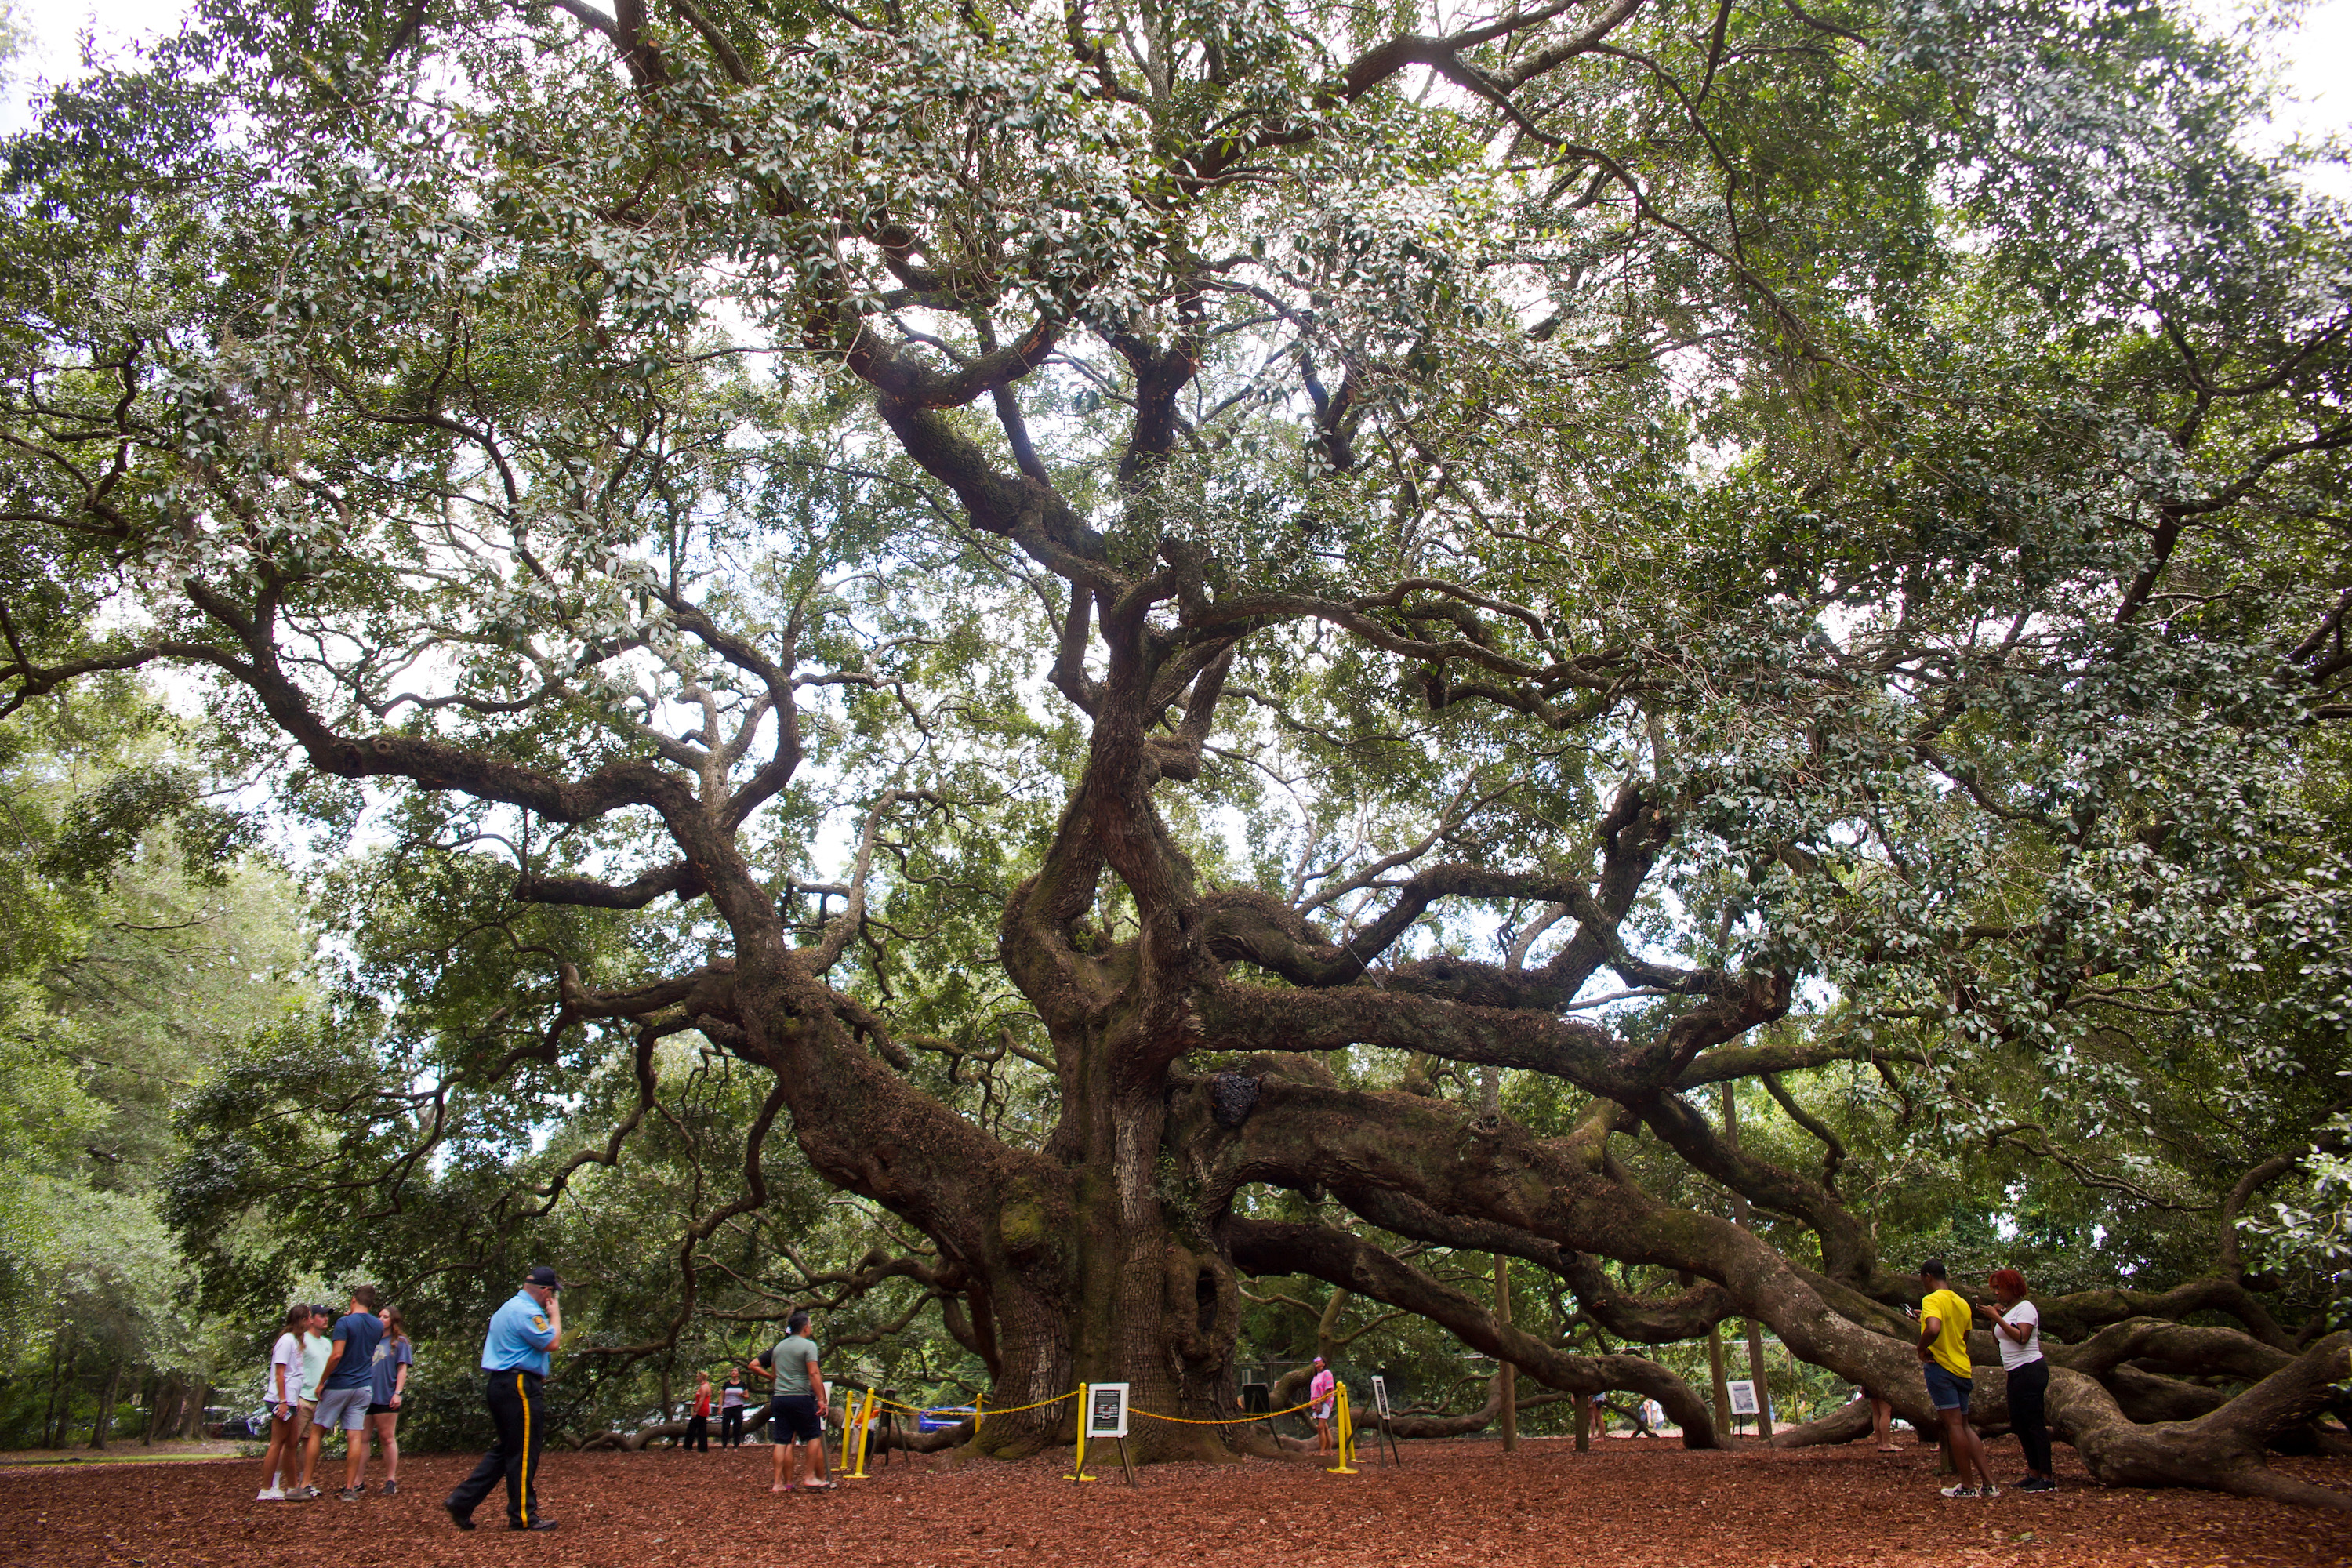 A giant oak tree with branches that touch the ground